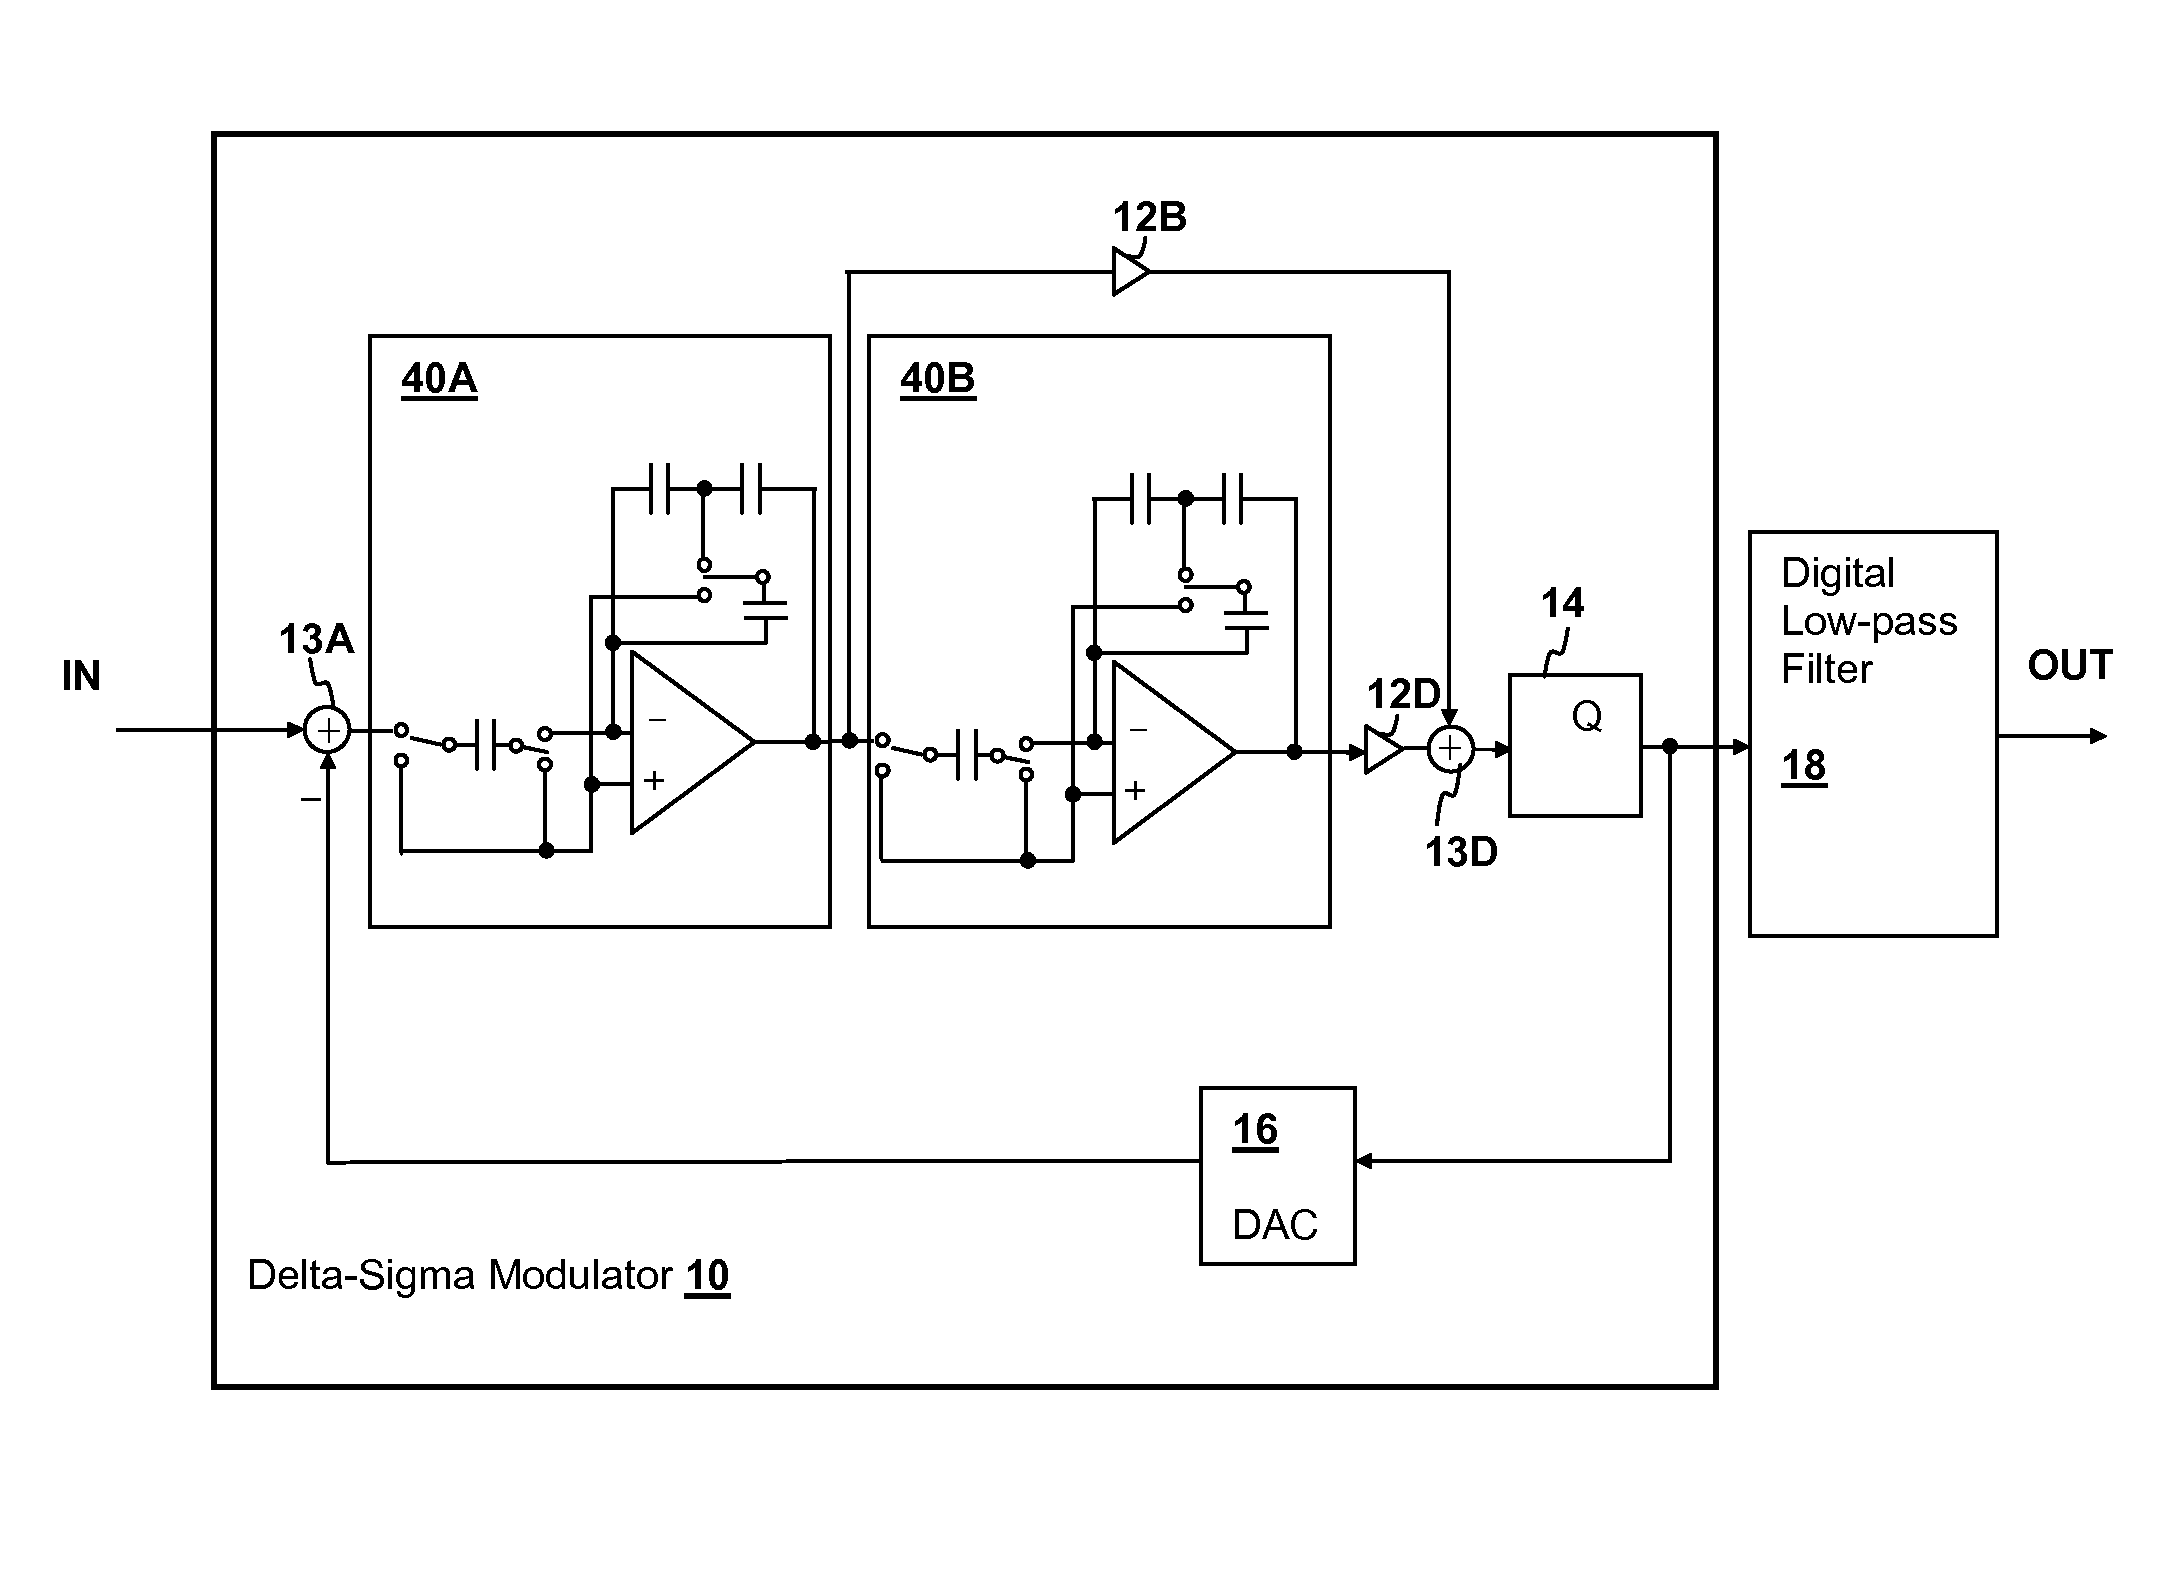 Feed-forward analog-to-digital converter (ADC) with a reduced number of amplifiers and feed-forward signal paths